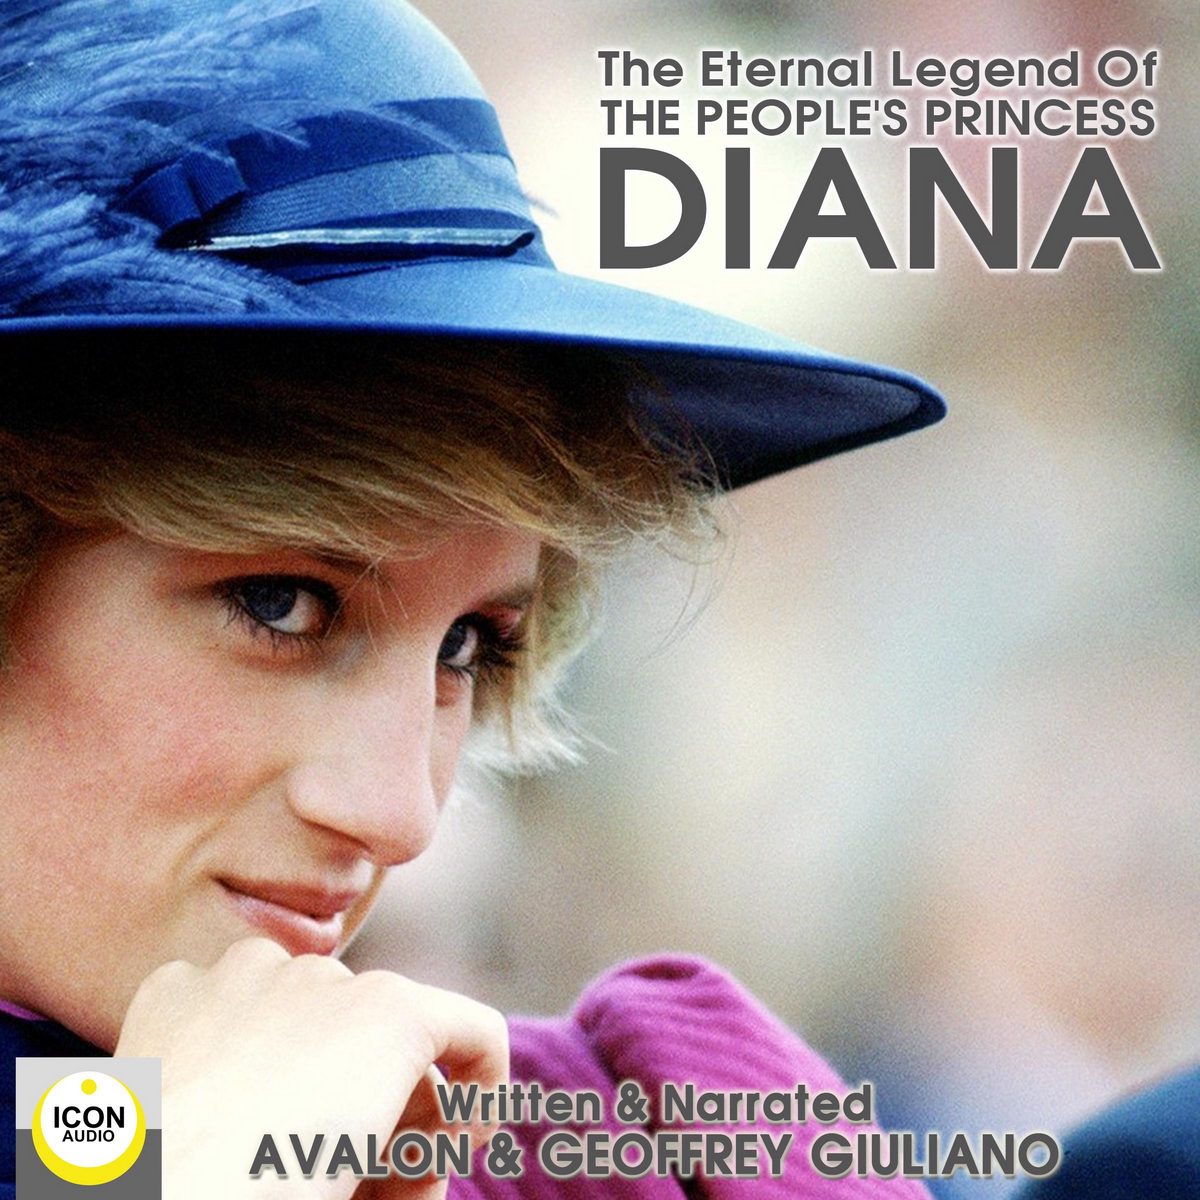 The Eternal Legend Of The People’s Princess Diana